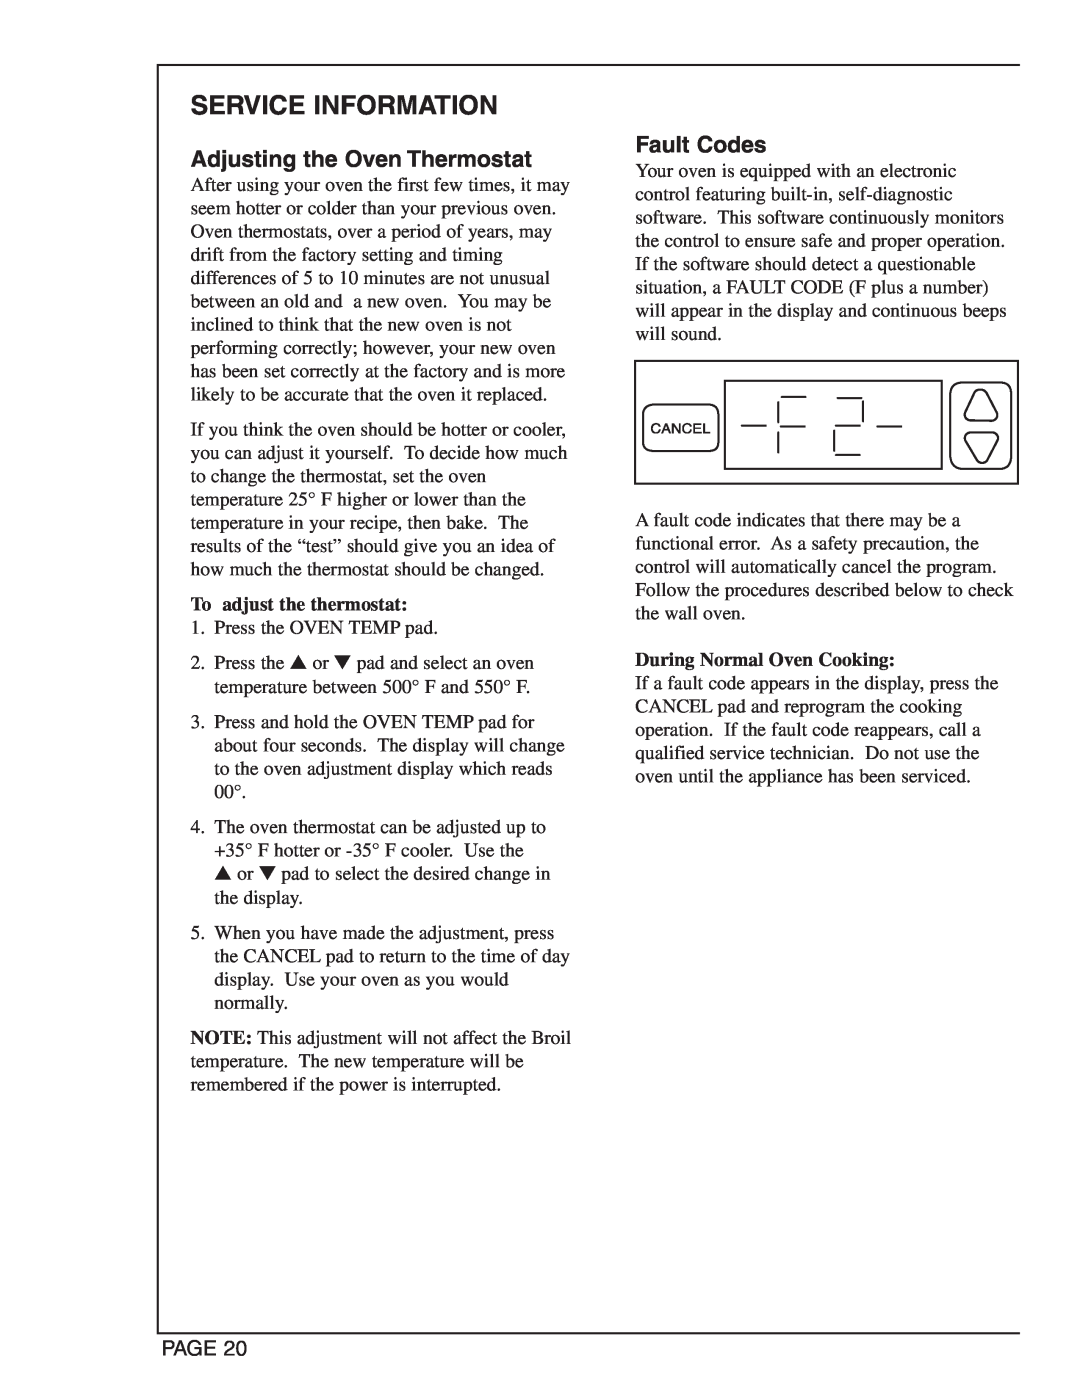 Maytag CWG4600 manual Service Information, Adjusting the Oven Thermostat, Fault Codes, To adjust the thermostat, Page 